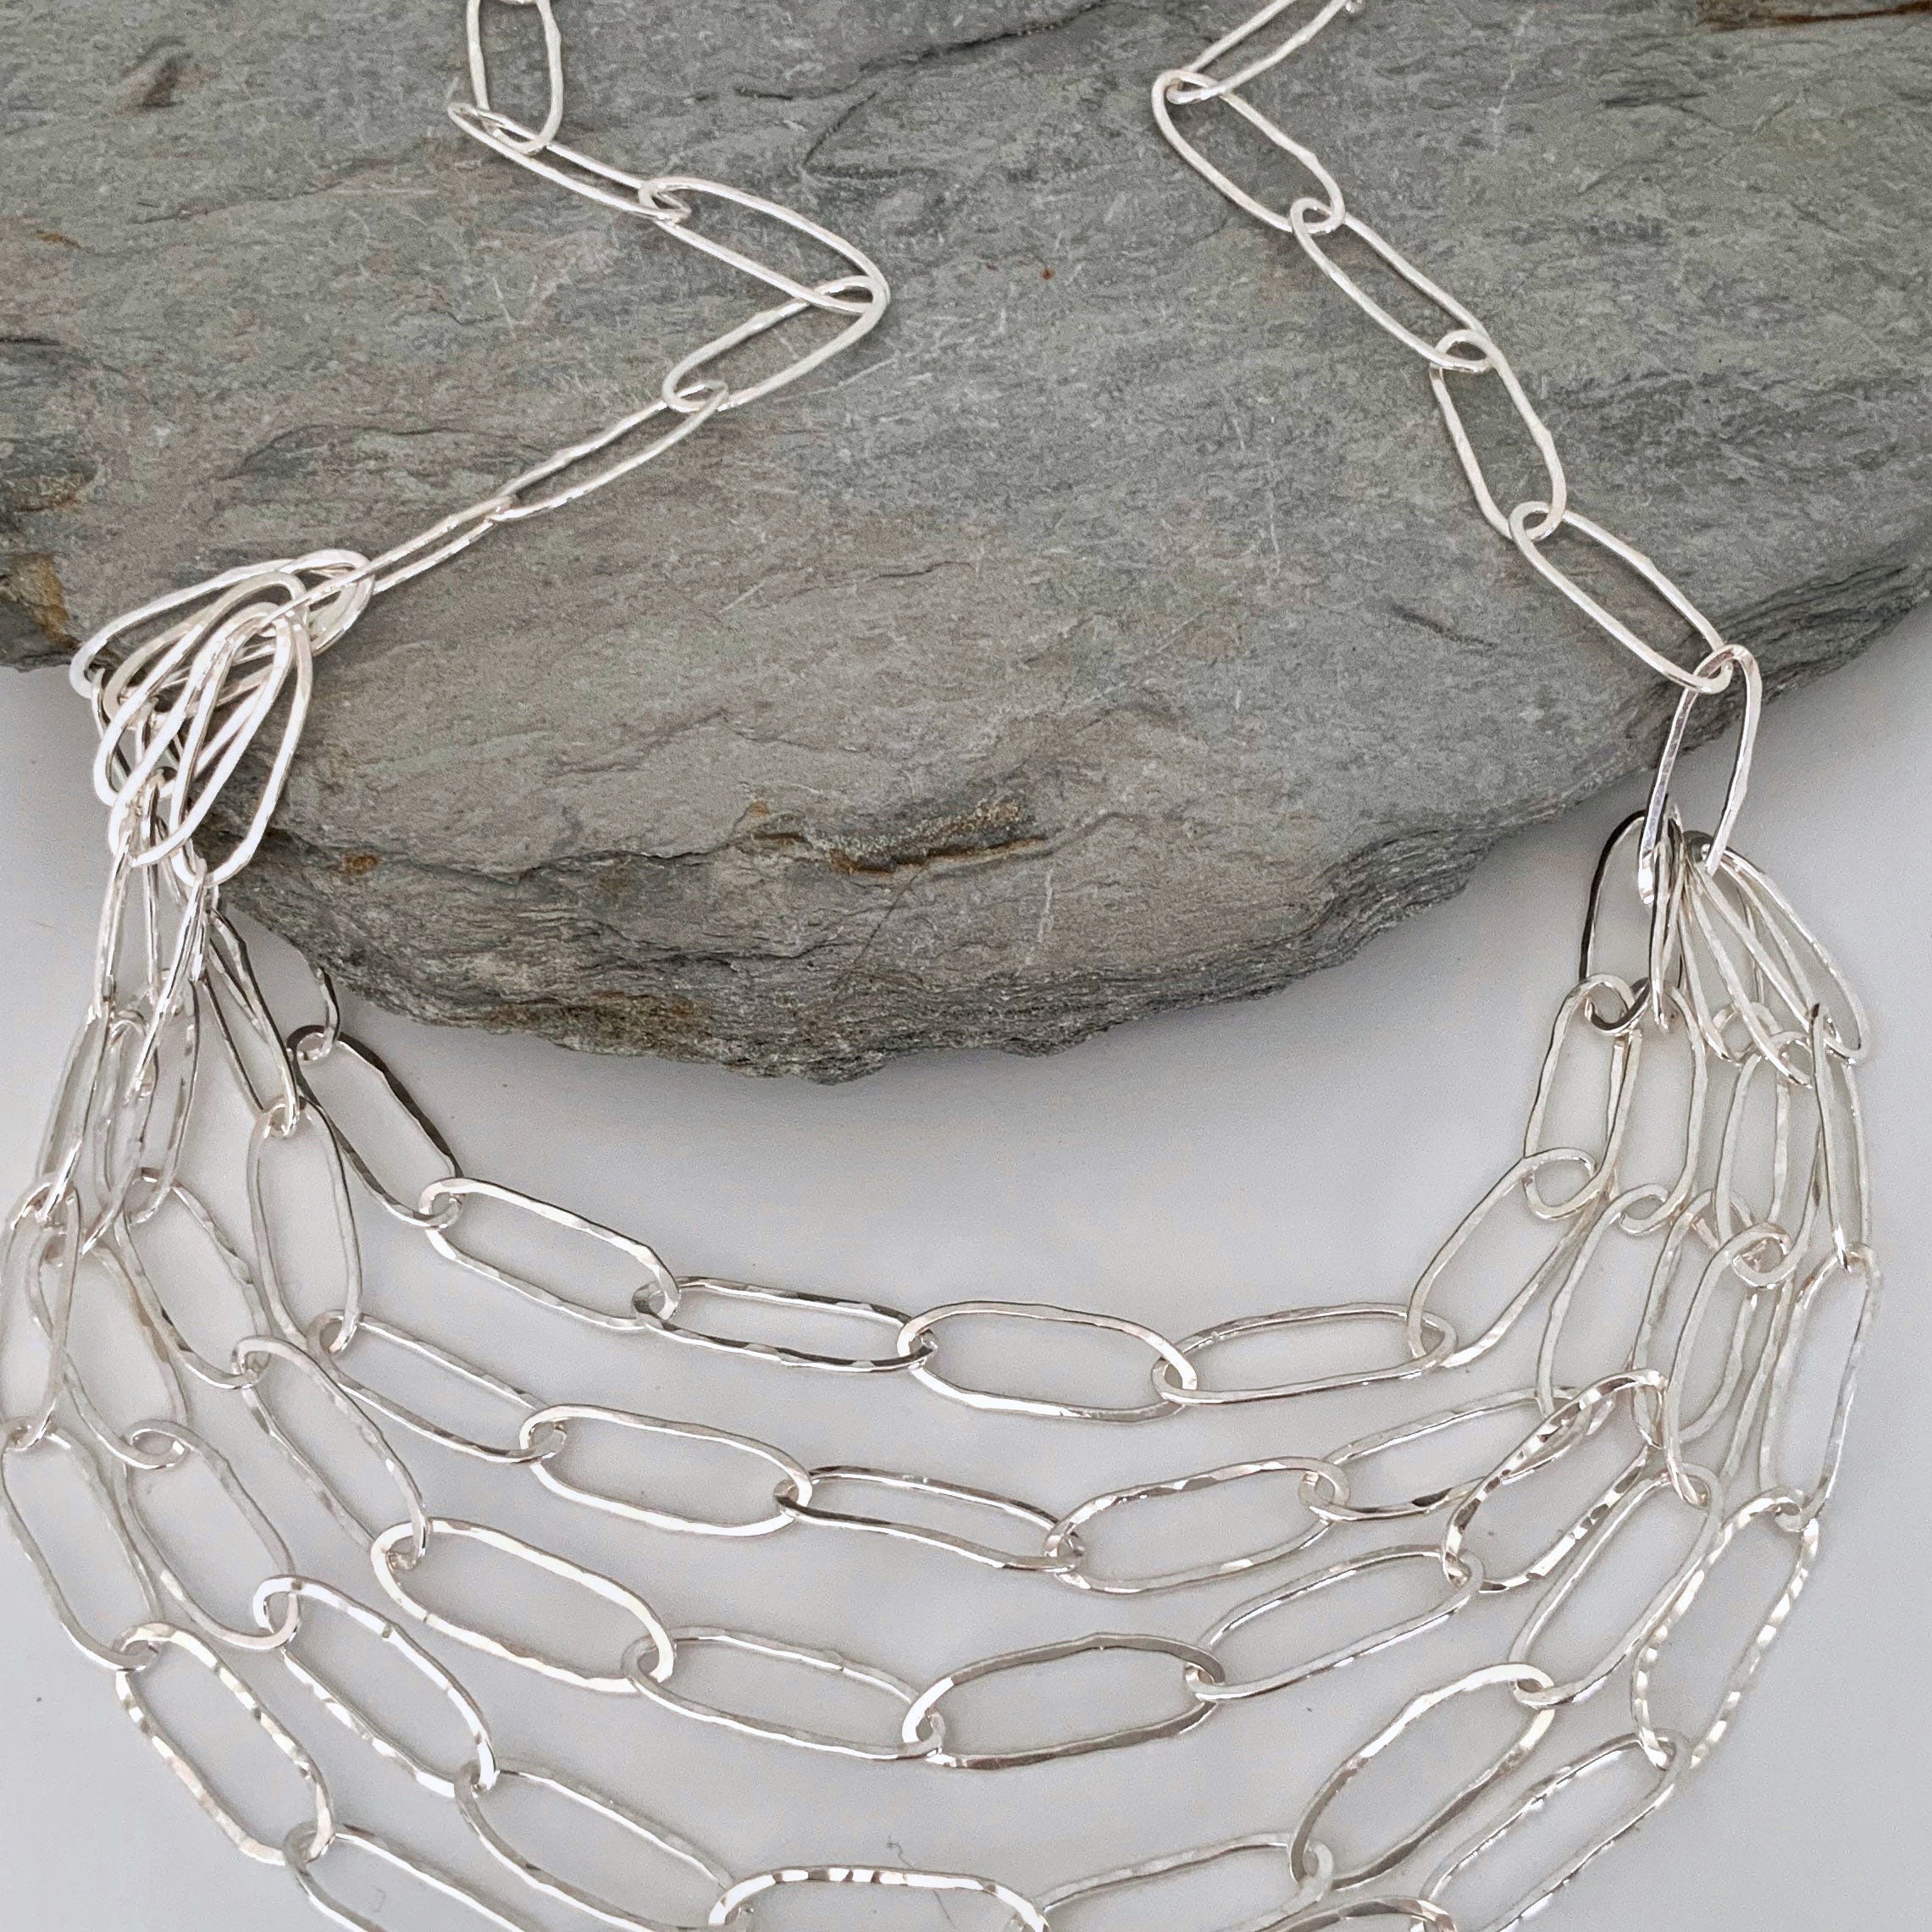 Handmade Silver Chain Necklace With Oblong Links, Multi Strand Necklace, Unusual Paper Clip